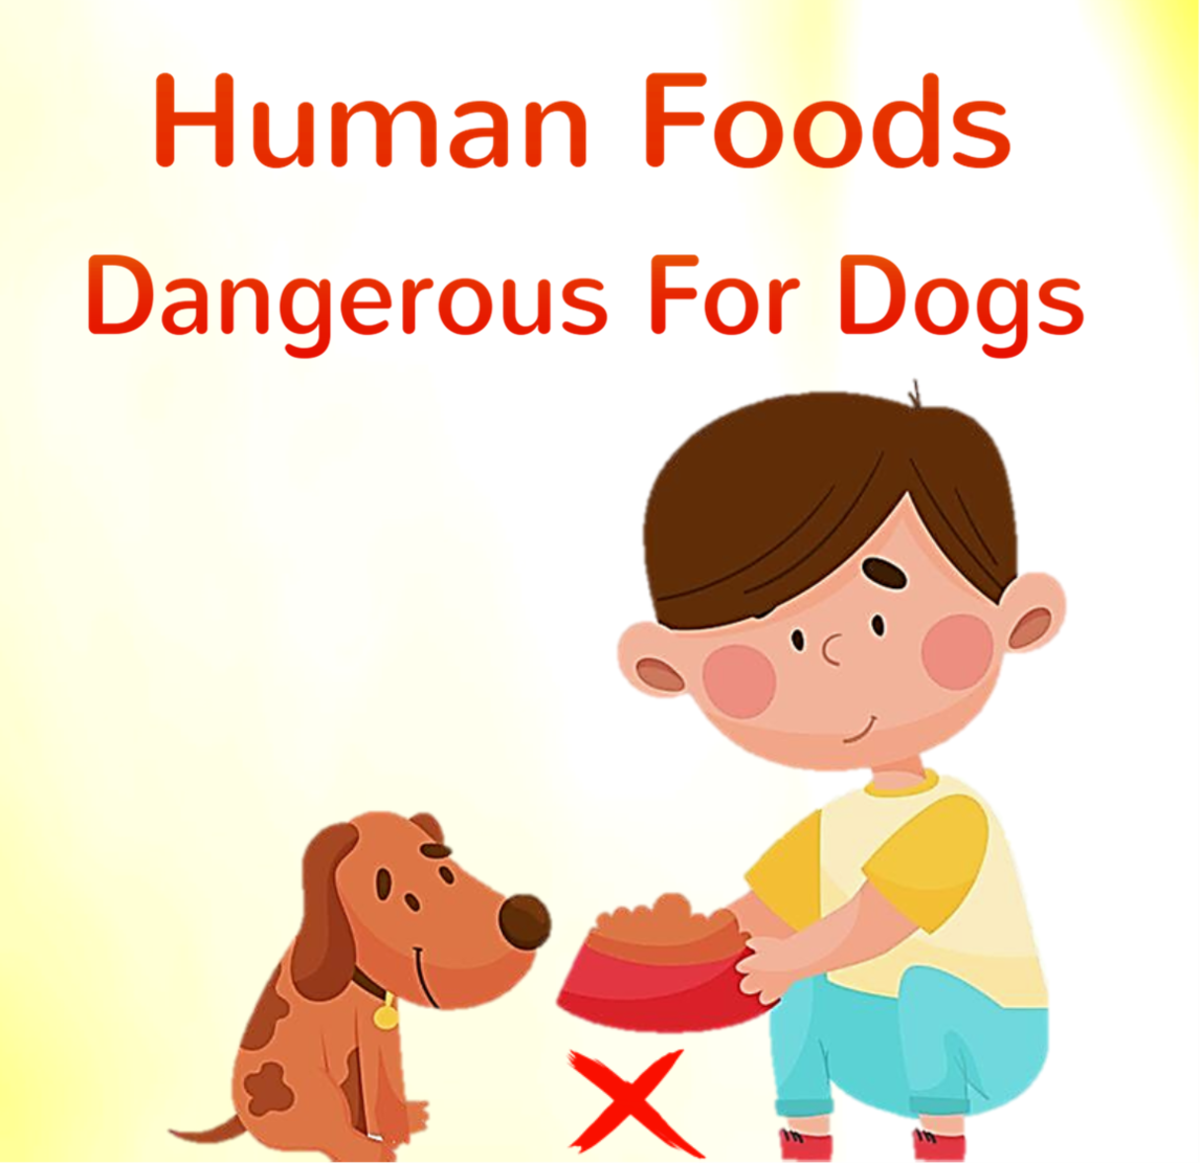 Human Foods Dangerous for Dogs